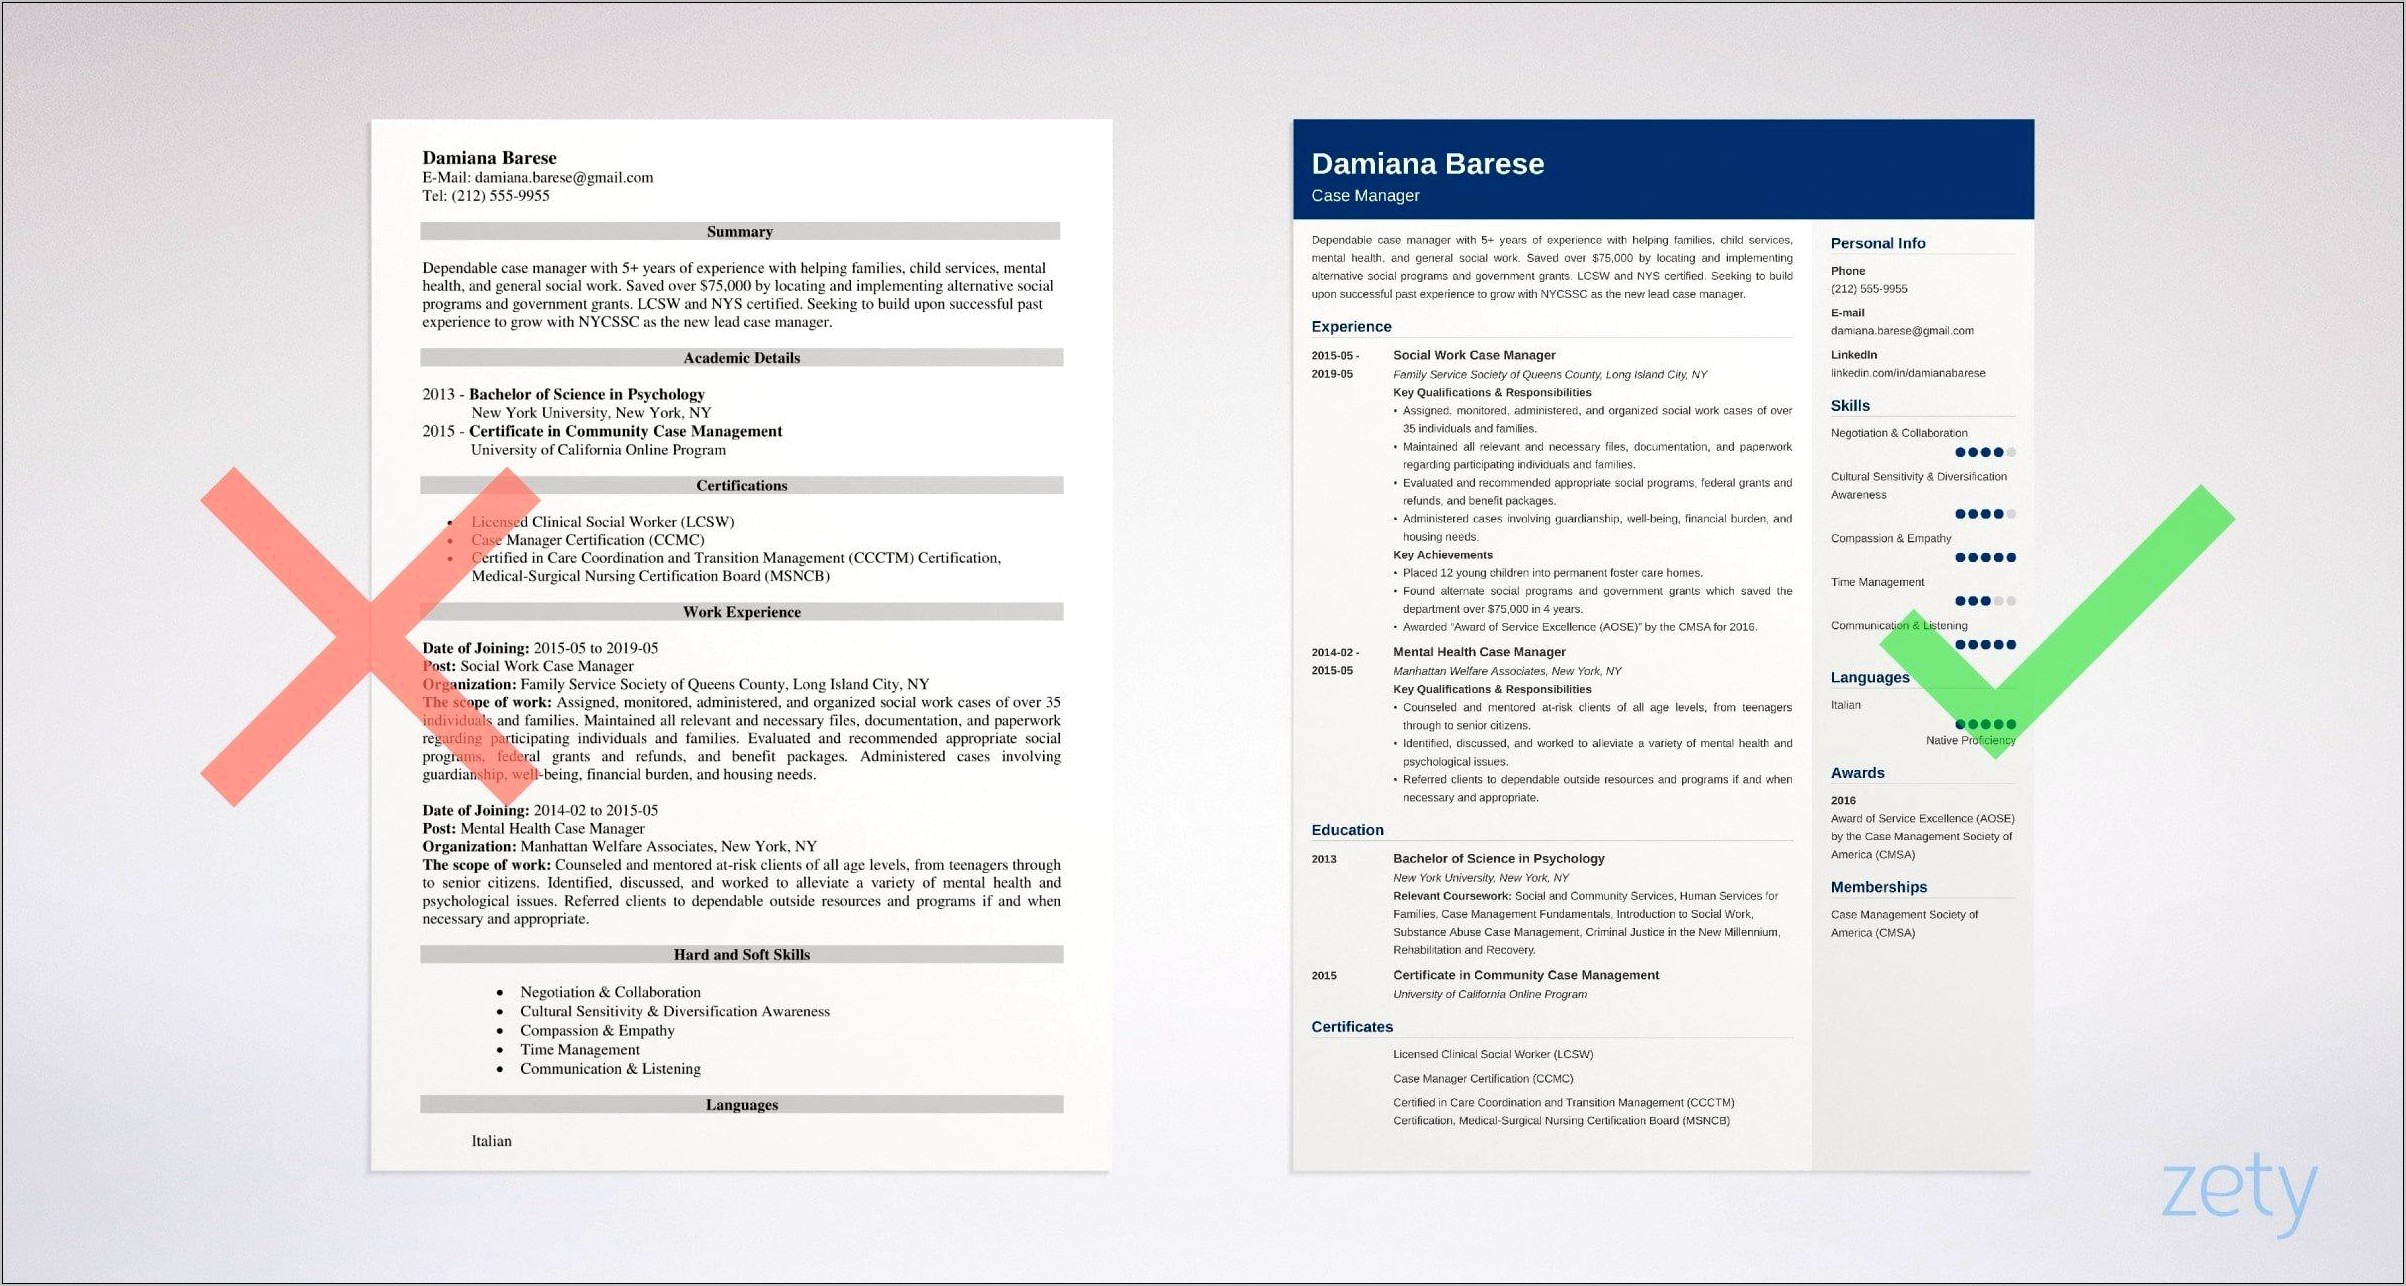 Exemple Of Case Manager Resume